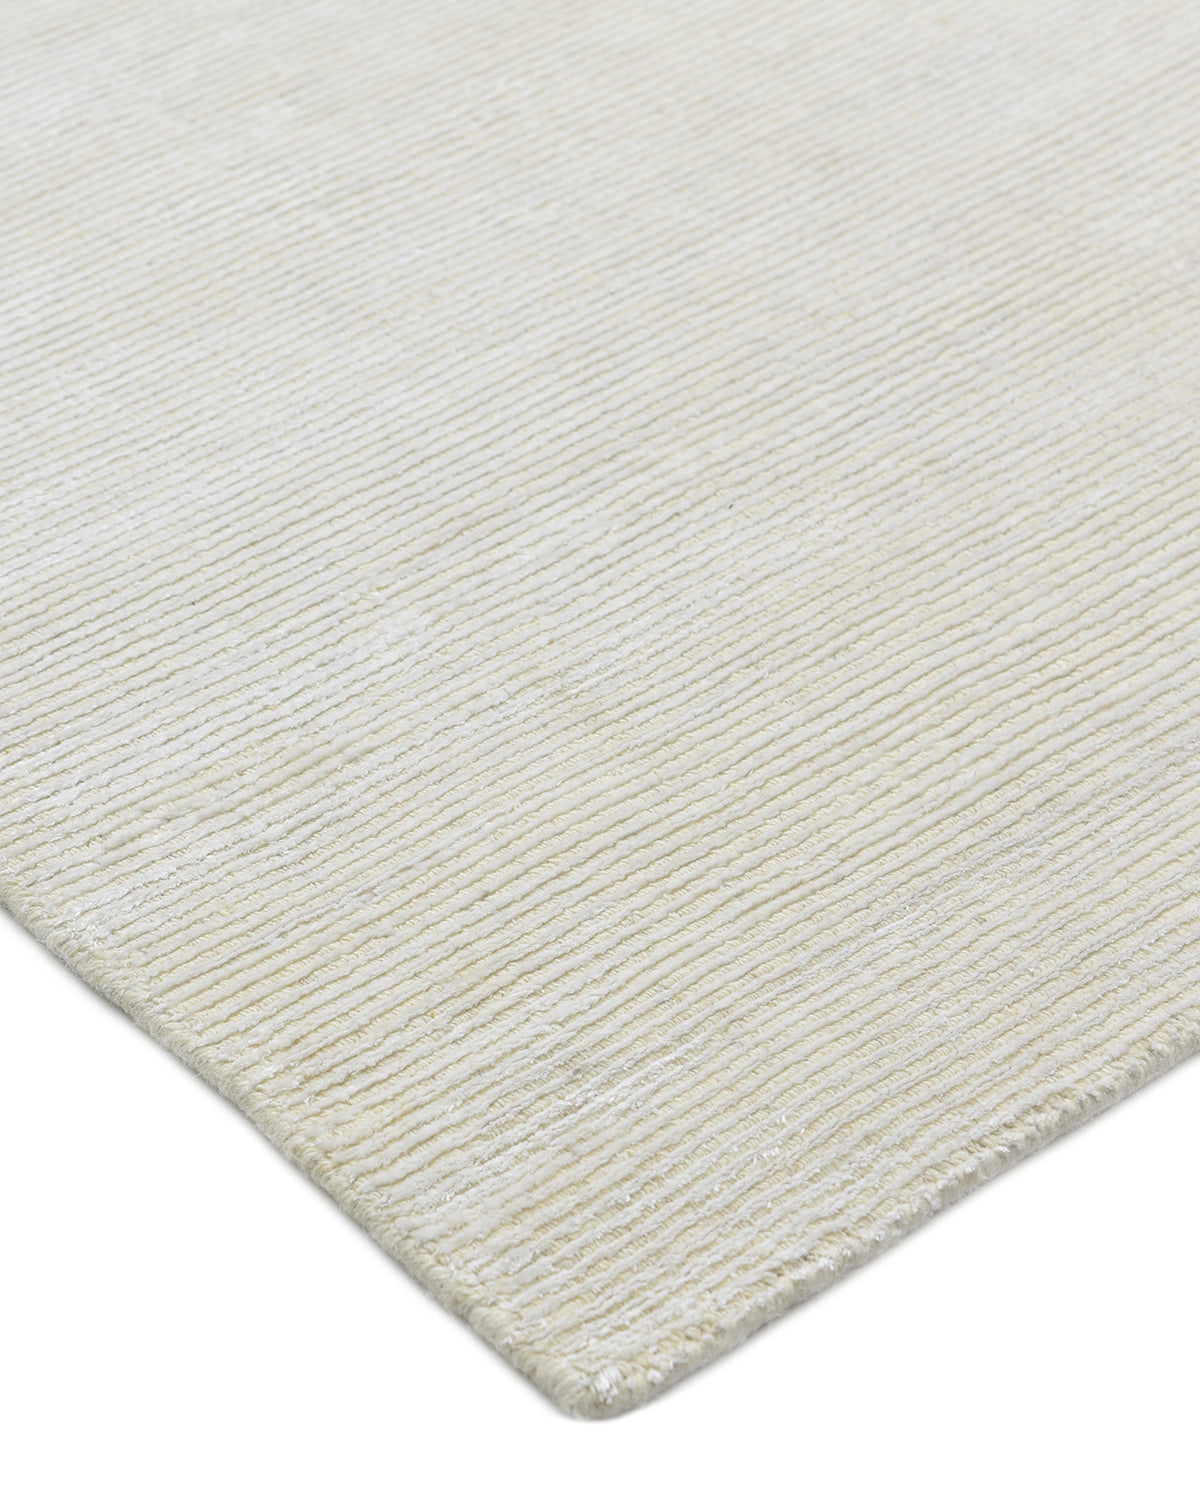 Cordi Hand Loomed Contemporary Solid Area Rug